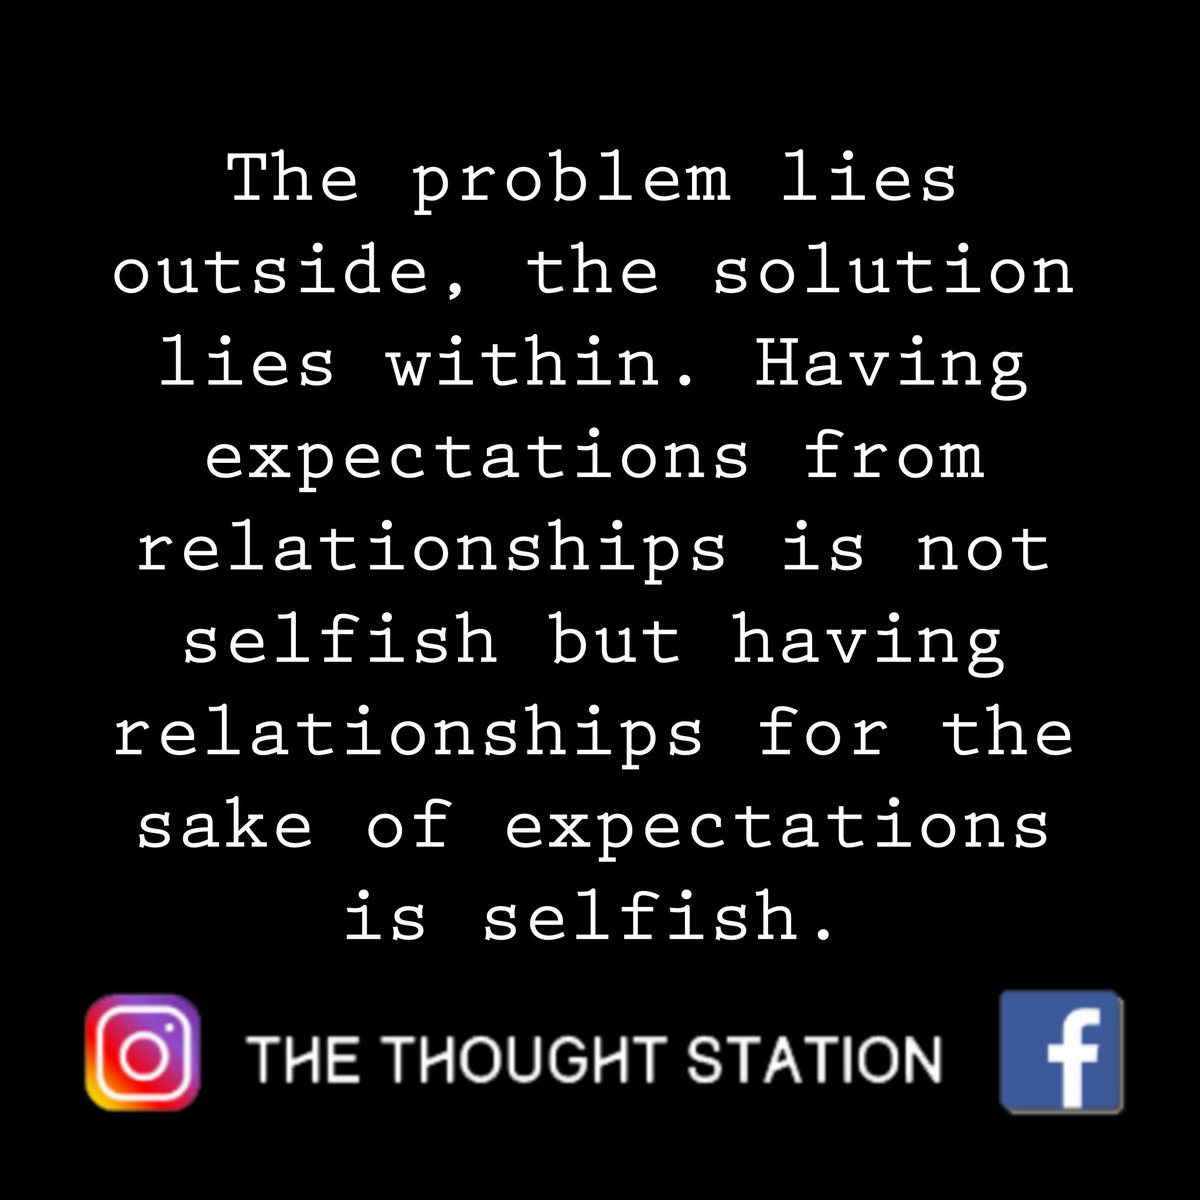 #thoughts #positivethoughts #thoughtsoftheday #thoughtsbecomethings #thoughtsforlife #quotes #quotesaboutlife #quotestoliveby #quotestagram #quotesoftheday #quotestags #quotesdaily #successquotes #successmindset #successtips #successquote #successtip #successminded #successcoach